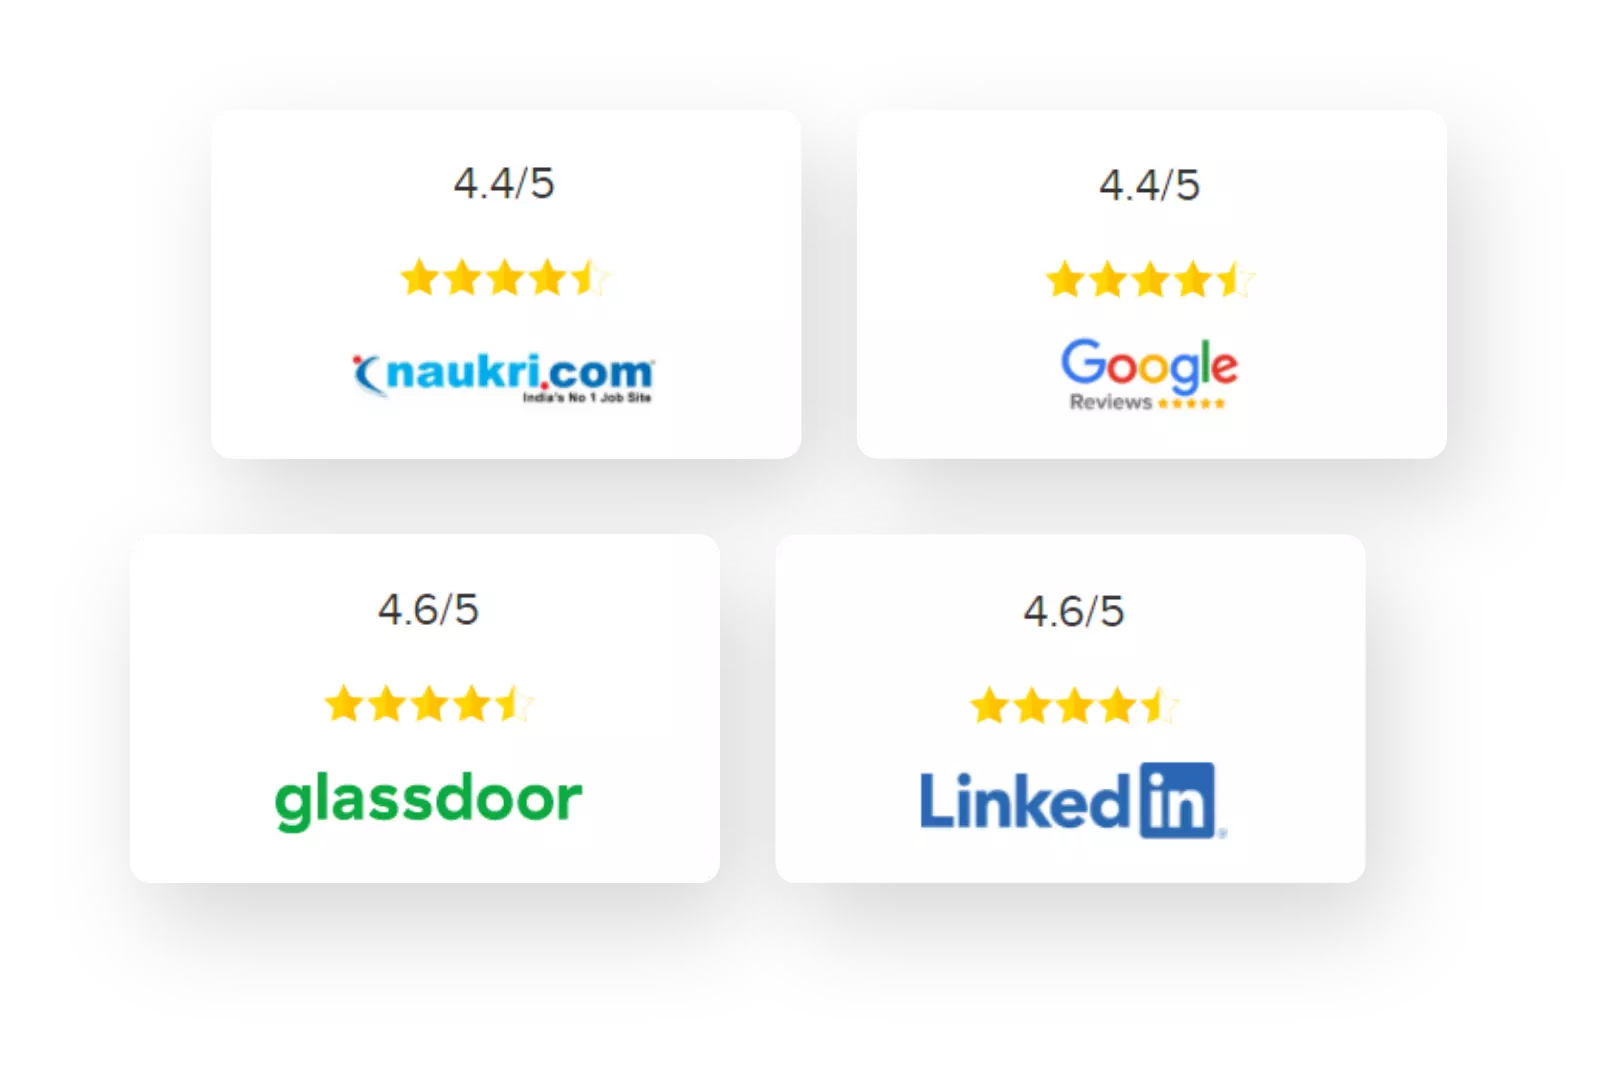 Ratings from various websites such as Naukri, Google, Glassdoor, and LinkedIn